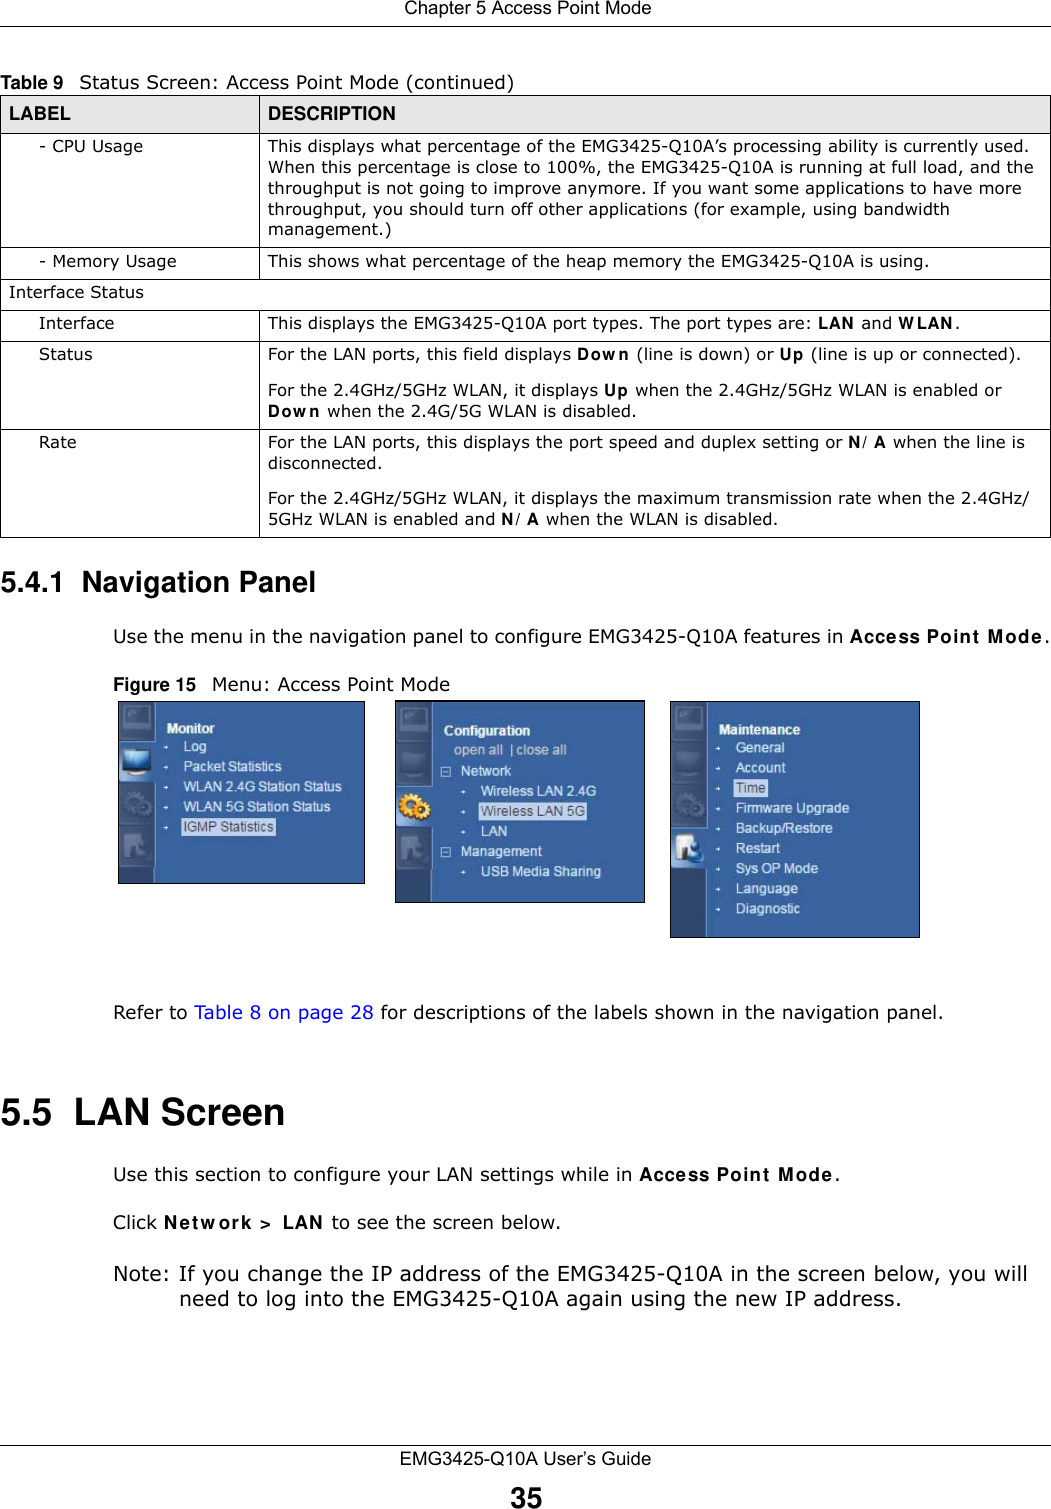  Chapter 5 Access Point ModeEMG3425-Q10A User’s Guide355.4.1  Navigation PanelUse the menu in the navigation panel to configure EMG3425-Q10A features in Acce ss Point Mode.Figure 15   Menu: Access Point Mode Refer to Table 8 on page 28 for descriptions of the labels shown in the navigation panel.5.5  LAN ScreenUse this section to configure your LAN settings while in Access Point  Mode. Click N et w ork &gt;  LAN  to see the screen below.Note: If you change the IP address of the EMG3425-Q10A in the screen below, you will need to log into the EMG3425-Q10A again using the new IP address.- CPU Usage This displays what percentage of the EMG3425-Q10A’s processing ability is currently used. When this percentage is close to 100%, the EMG3425-Q10A is running at full load, and the throughput is not going to improve anymore. If you want some applications to have more throughput, you should turn off other applications (for example, using bandwidth management.)- Memory Usage This shows what percentage of the heap memory the EMG3425-Q10A is using. Interface StatusInterface This displays the EMG3425-Q10A port types. The port types are: LAN  and W LAN .Status For the LAN ports, this field displays Dow n (line is down) or Up (line is up or connected).For the 2.4GHz/5GHz WLAN, it displays Up when the 2.4GHz/5GHz WLAN is enabled or Dow n  when the 2.4G/5G WLAN is disabled.Rate For the LAN ports, this displays the port speed and duplex setting or N / A when the line is disconnected.For the 2.4GHz/5GHz WLAN, it displays the maximum transmission rate when the 2.4GHz/5GHz WLAN is enabled and N / A when the WLAN is disabled.Table 9   Status Screen: Access Point Mode (continued) LABEL DESCRIPTION